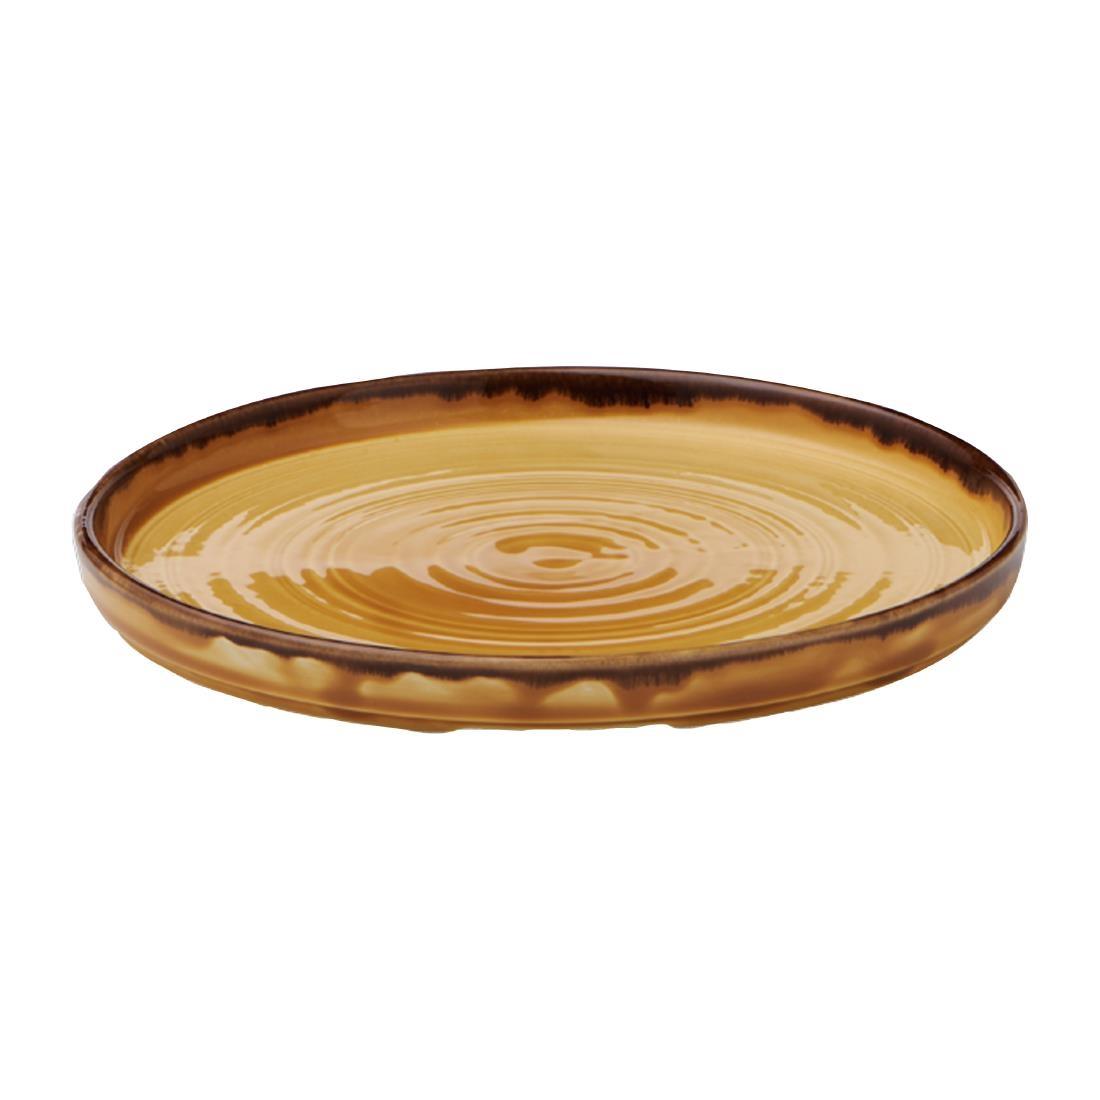 Dudson Harvest Walled Plates Mustard 210mm (Pack of 6) - FX154  - 2